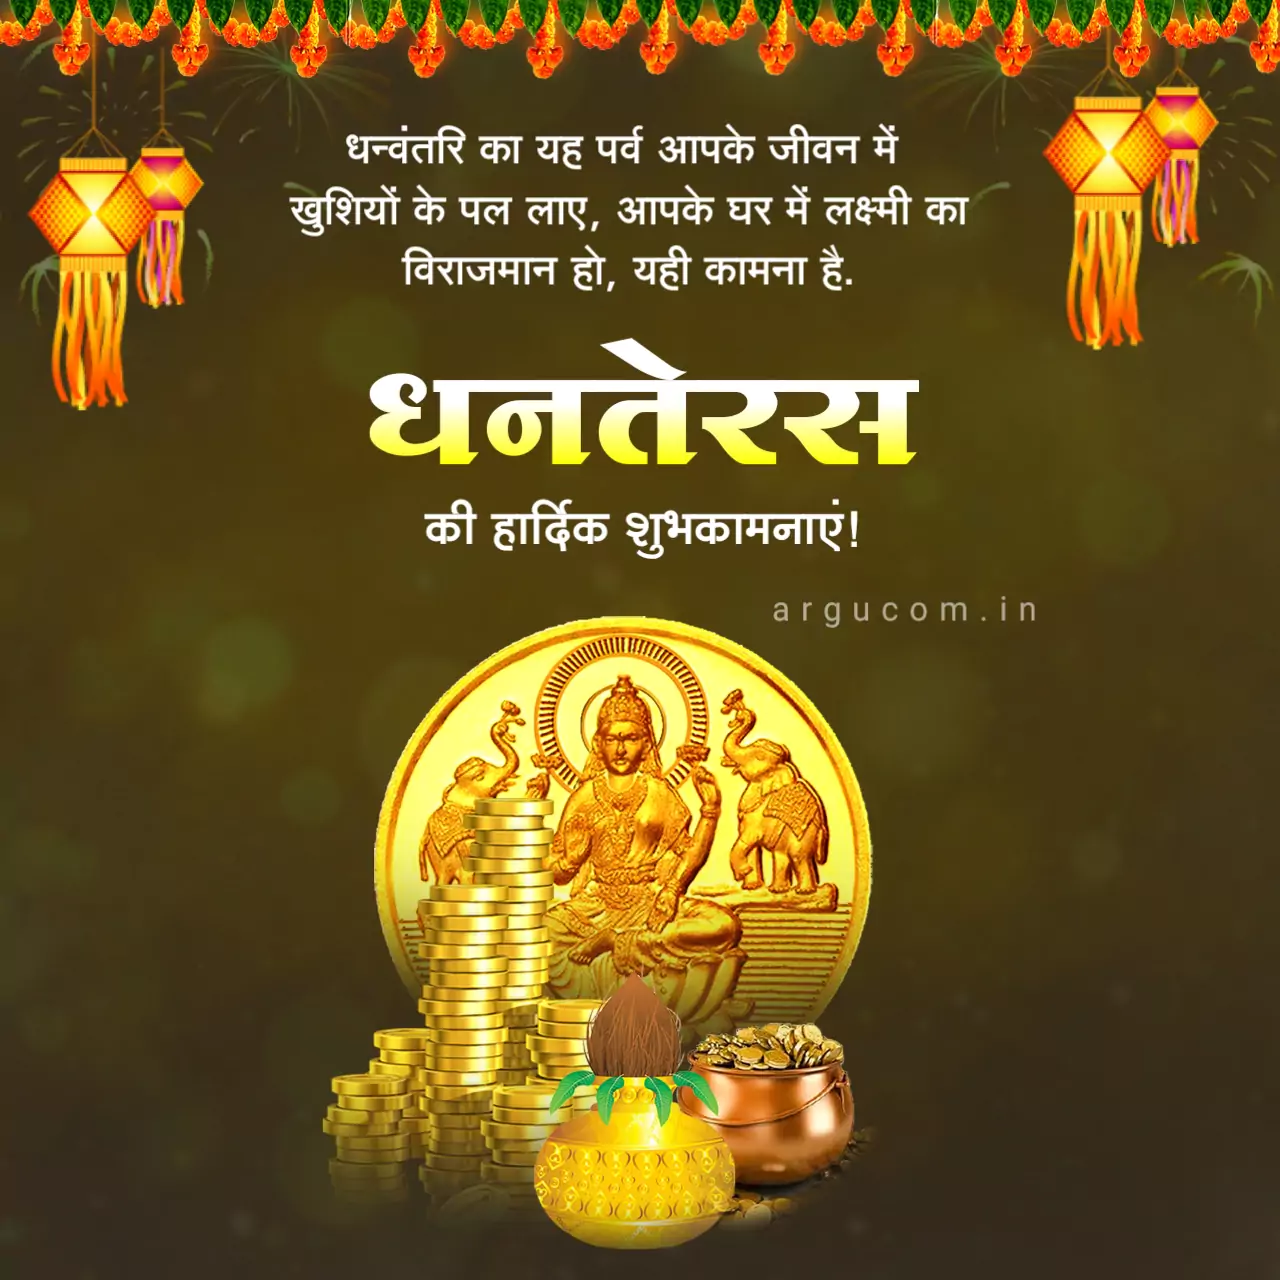 Happy Dhanteras wishes in hindi